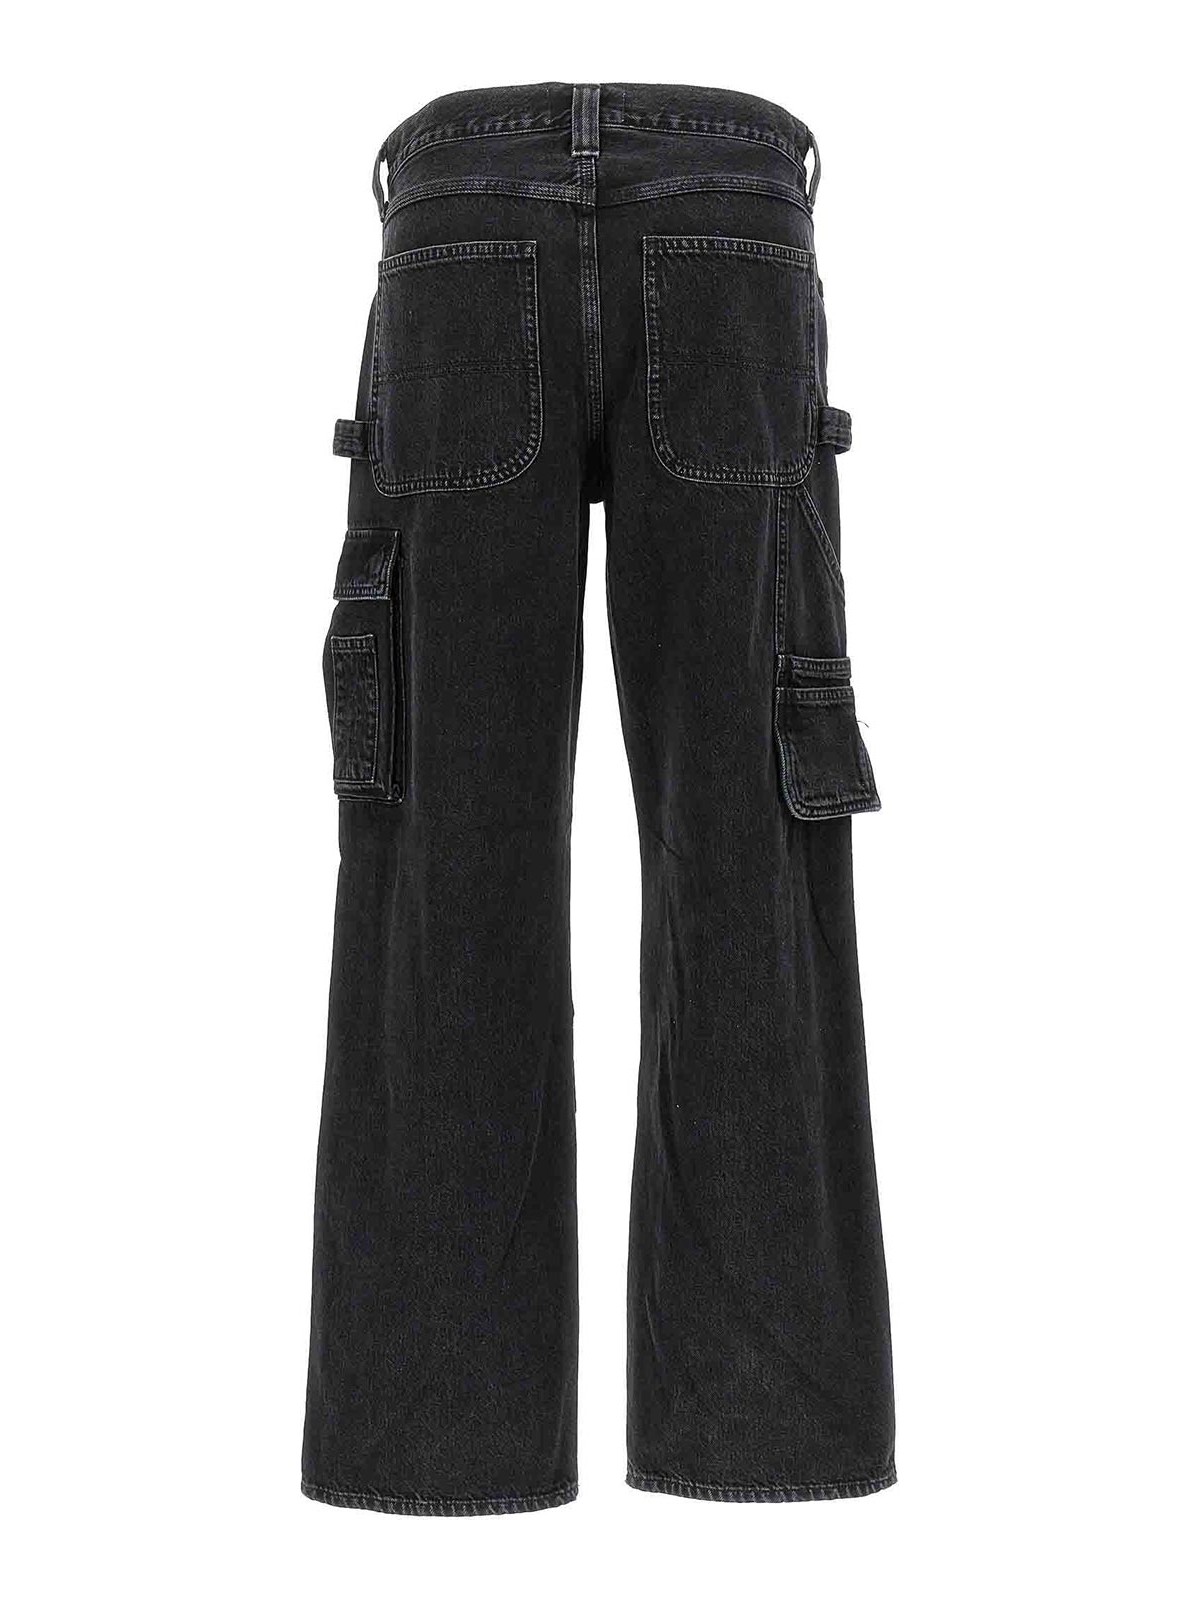 Shop Agolde Nera Jeans In Negro